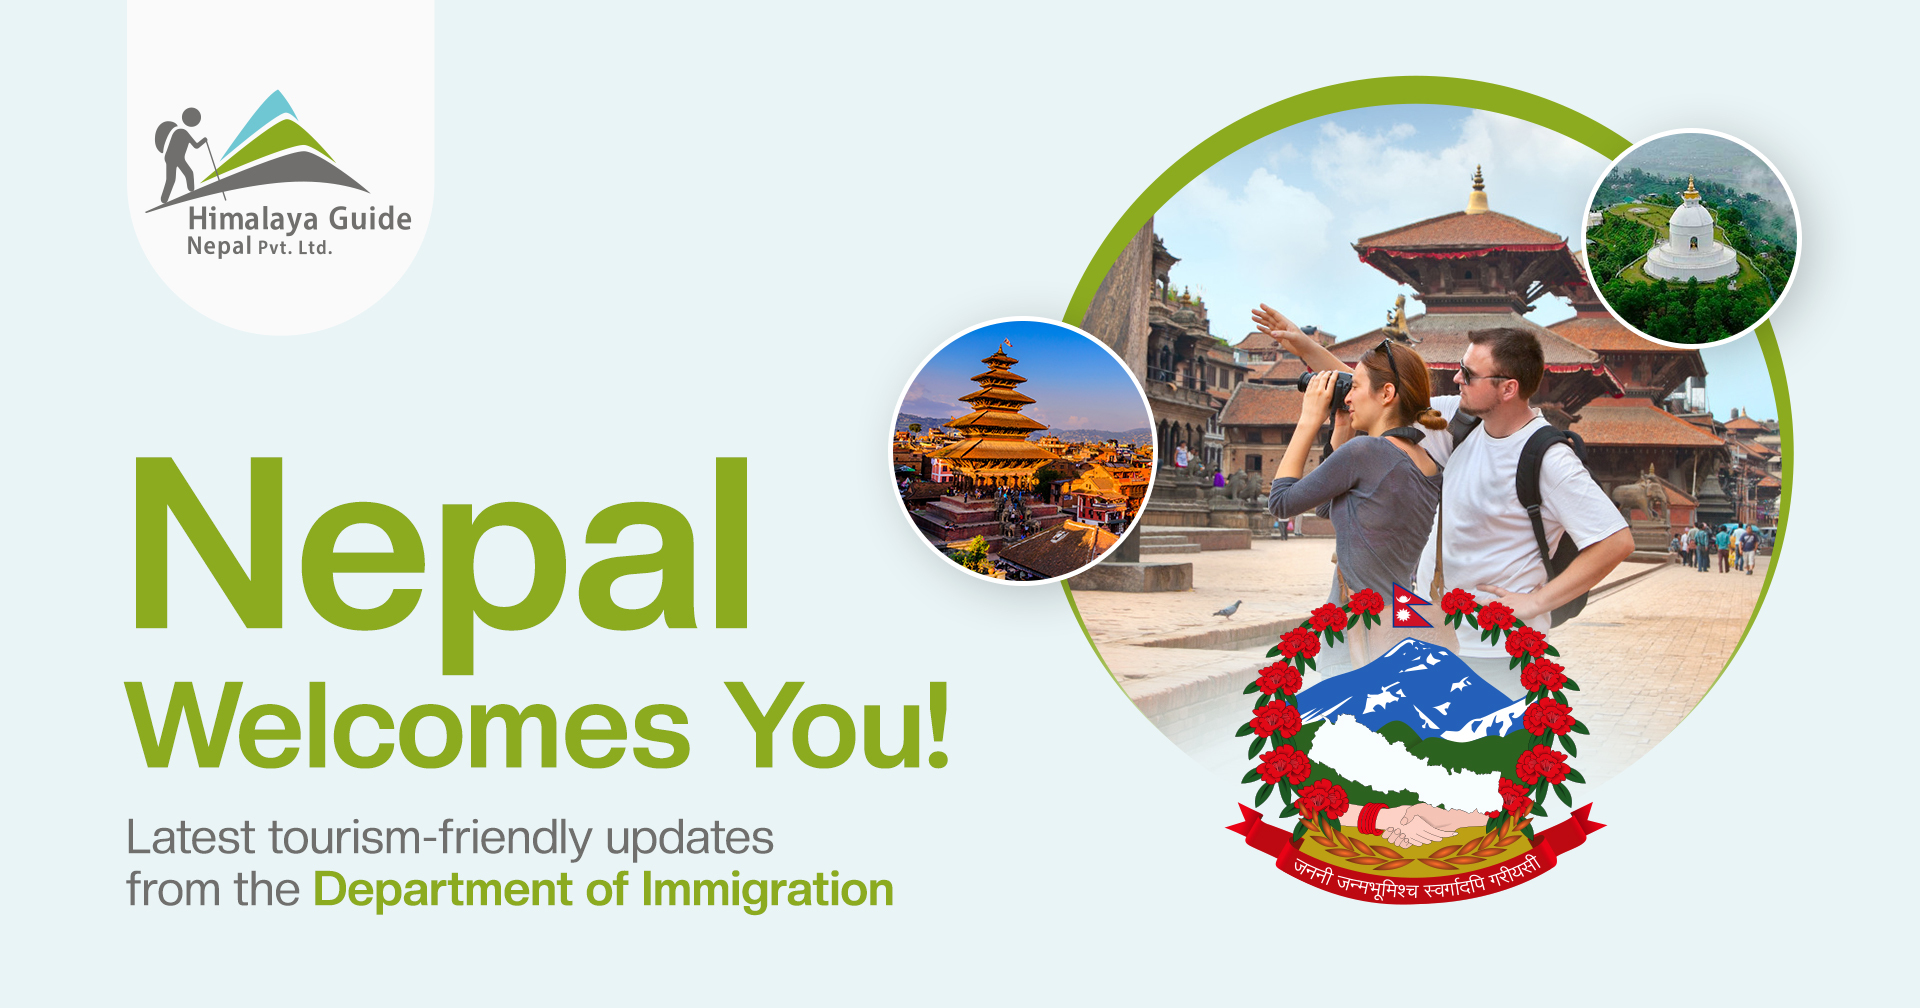 Nepal welcomes you! Tourism-friendly updates from the Immigration